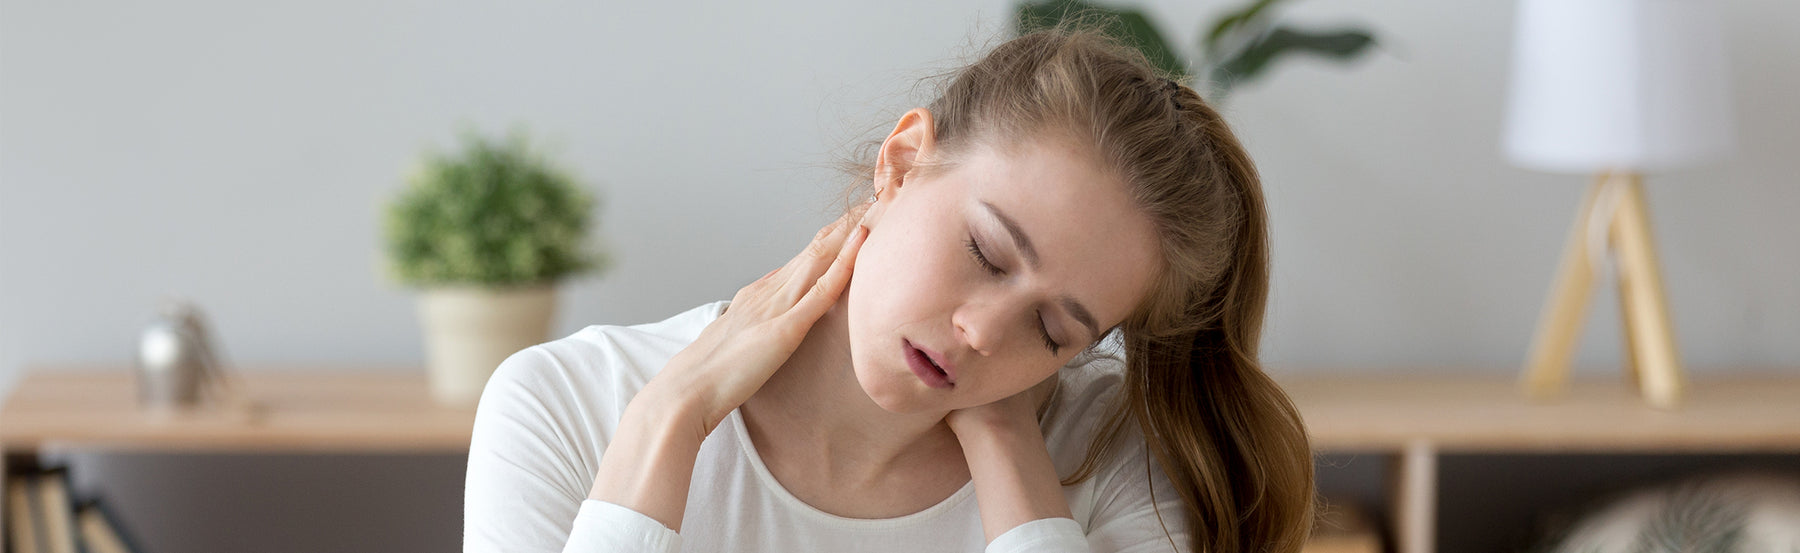 Using Good Habits to Relieve and Avoid Neck Pain